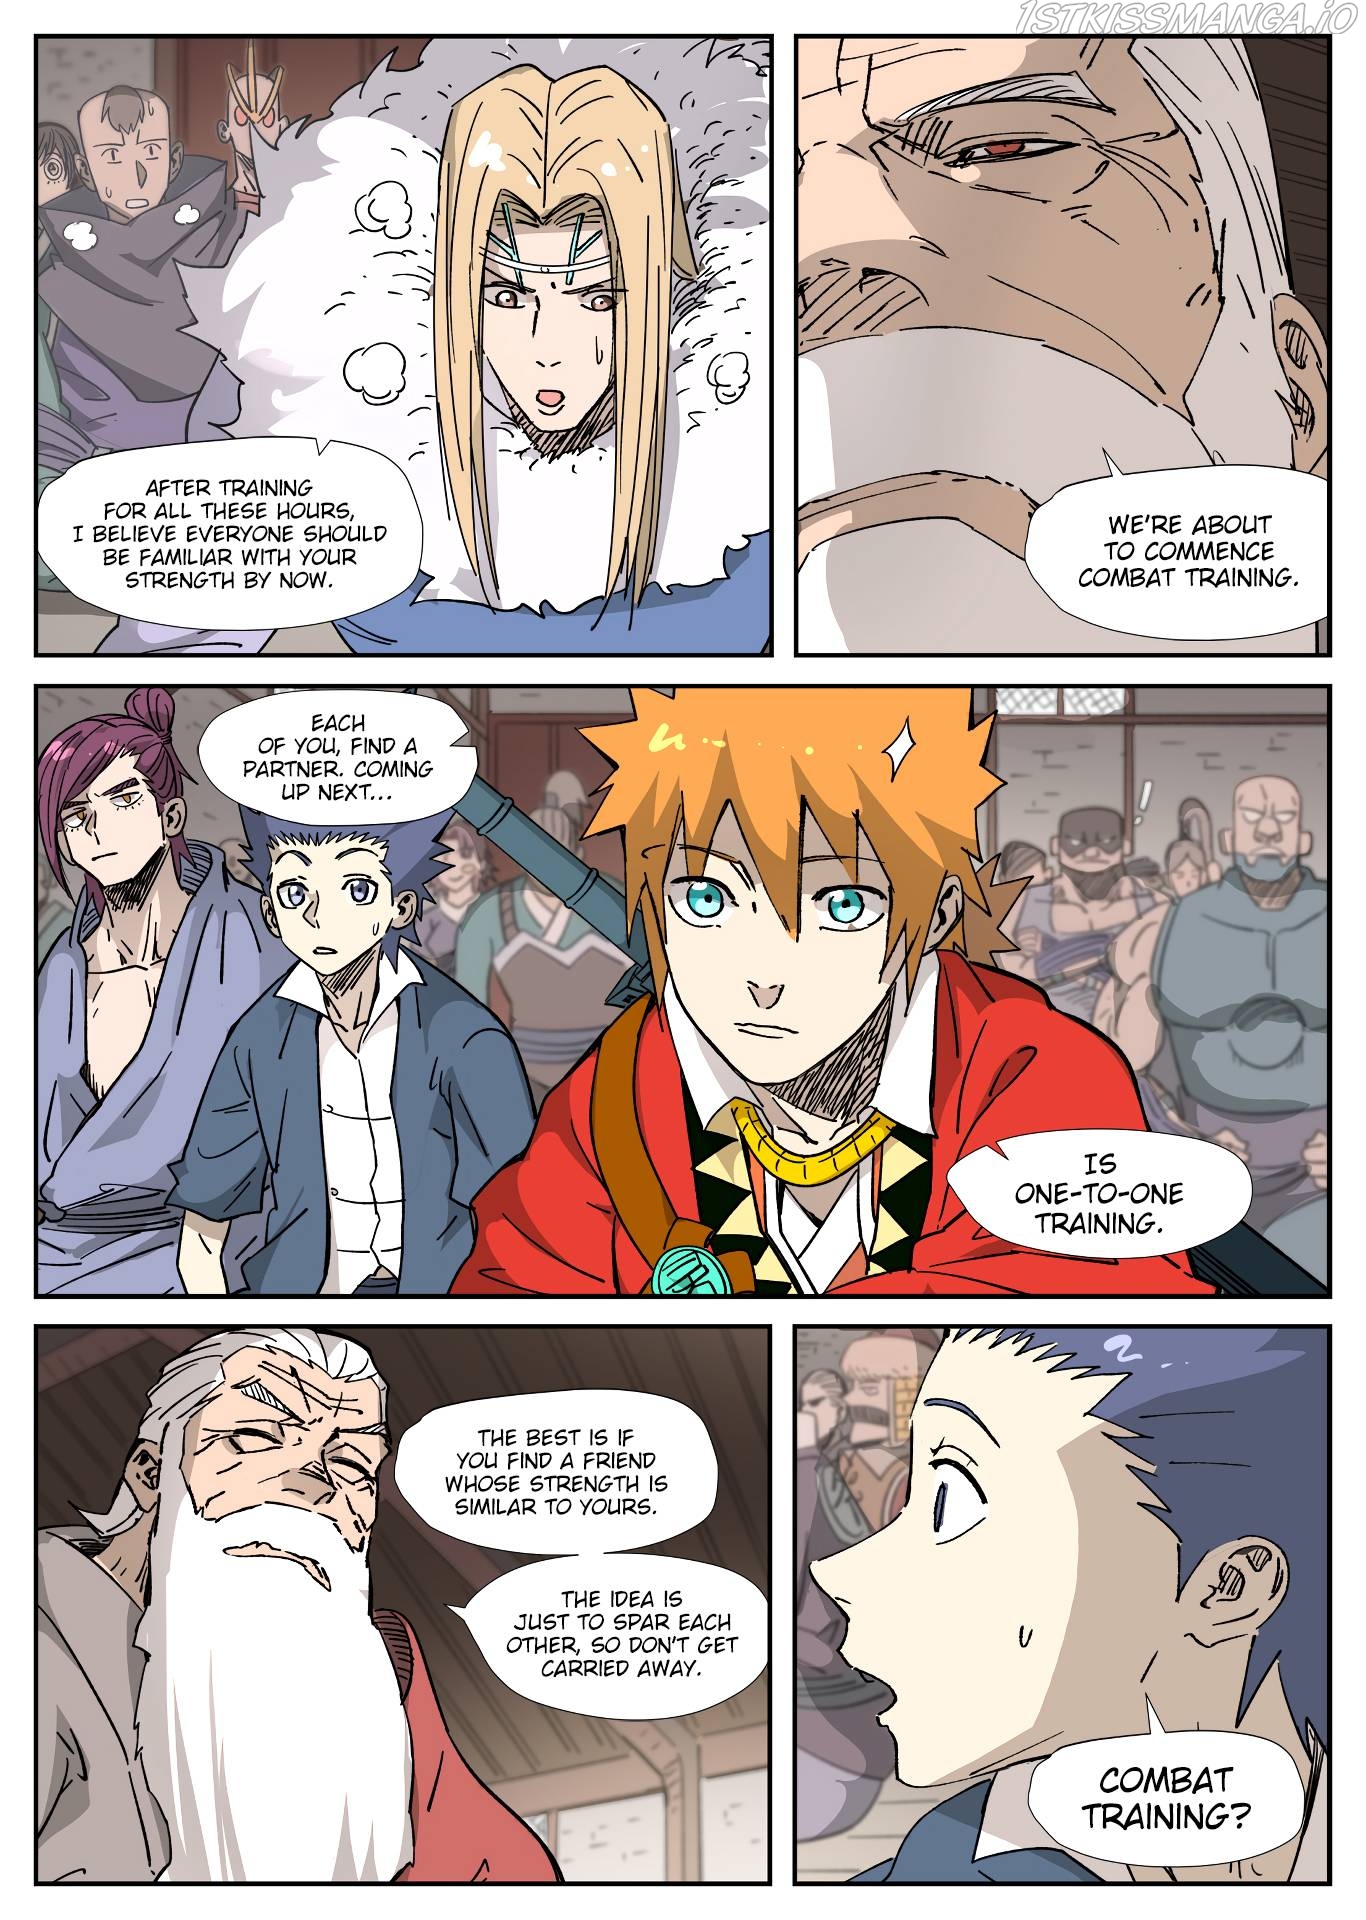 Tales of Demons and Gods Manhua Chapter 320.5 - Page 5